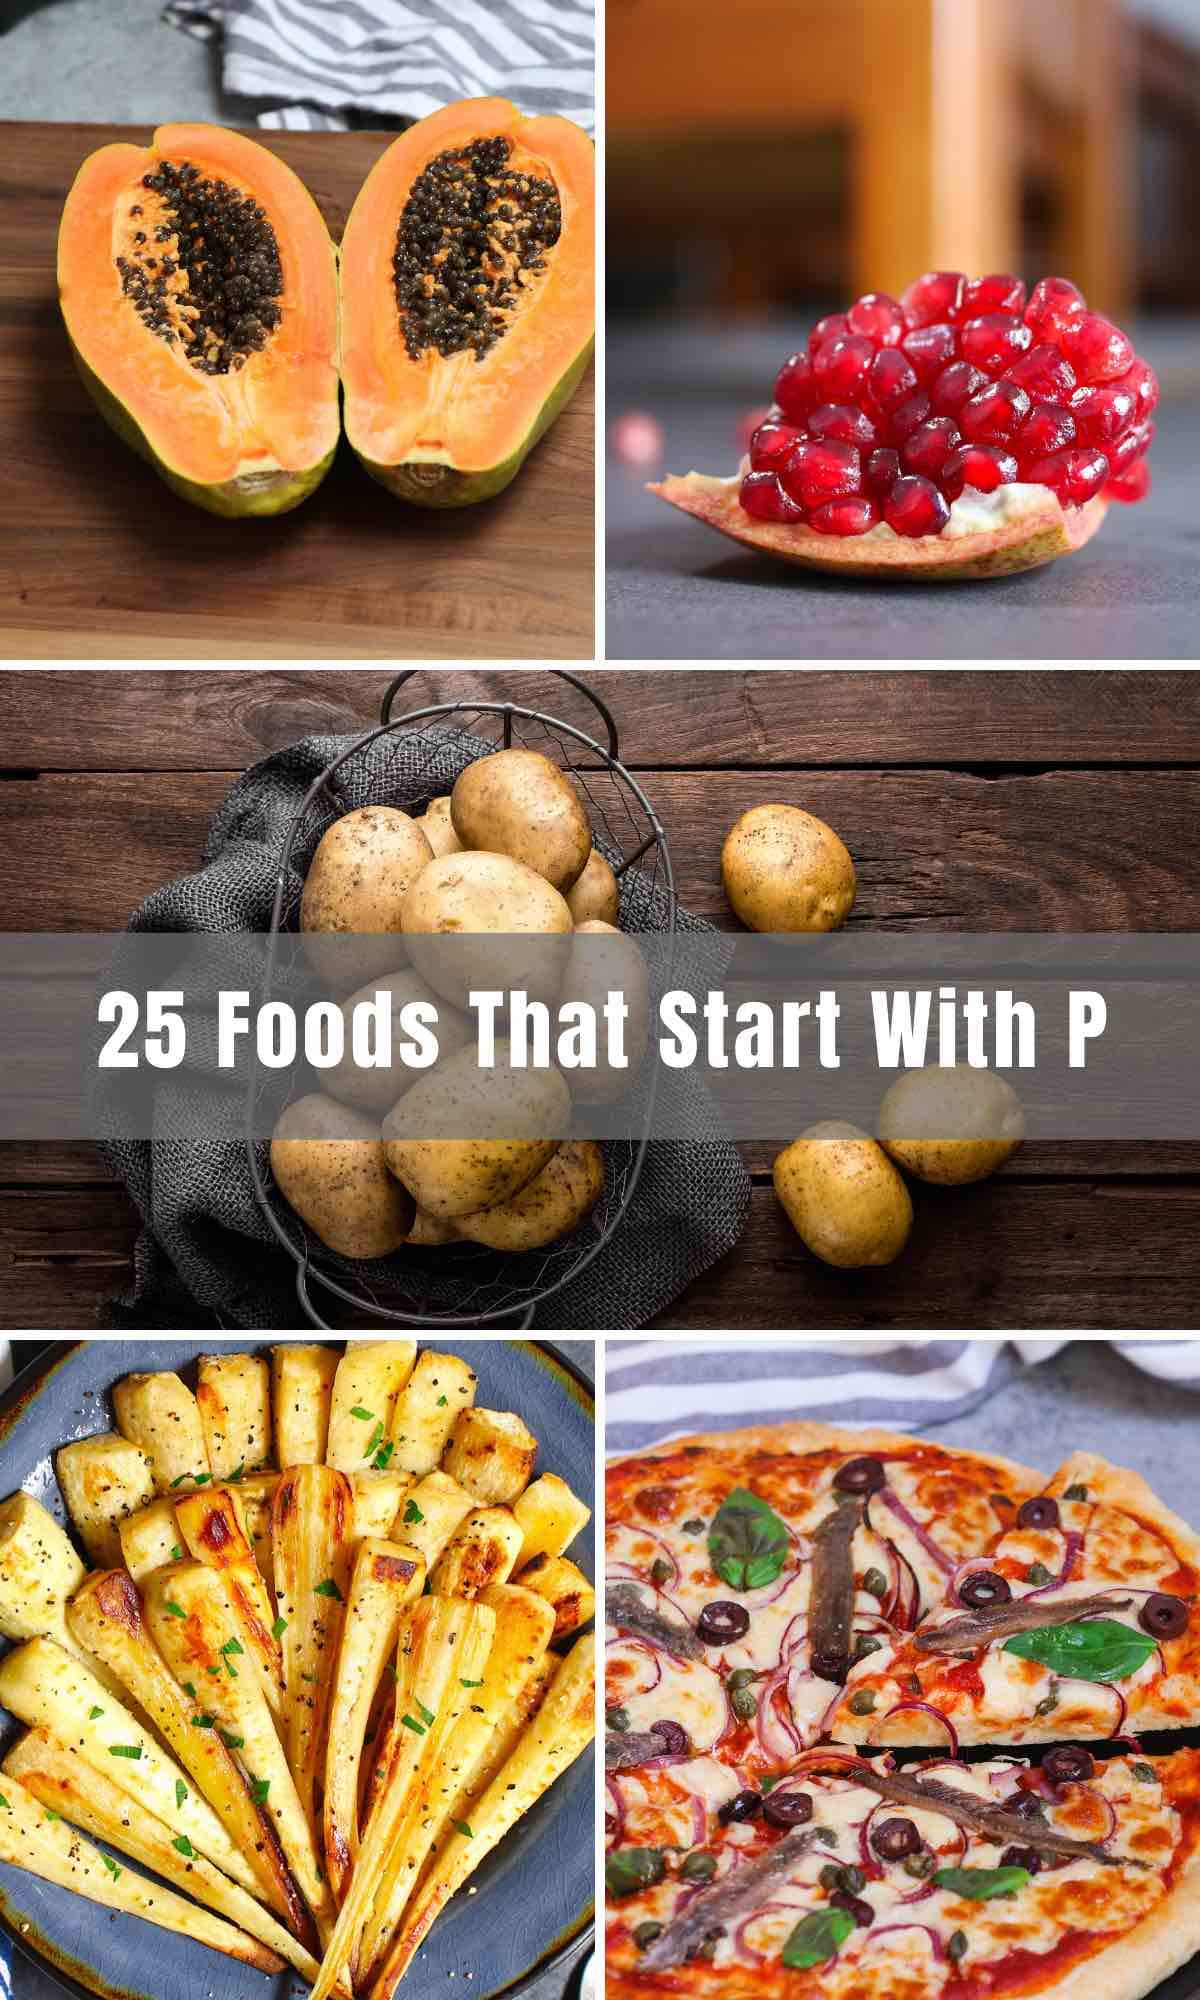 Have you ever been curious about Foods That Start With The Letter P and the many ways that you can enjoy them? We cover everything from fruits to vegetables, snacks, and other dishes!